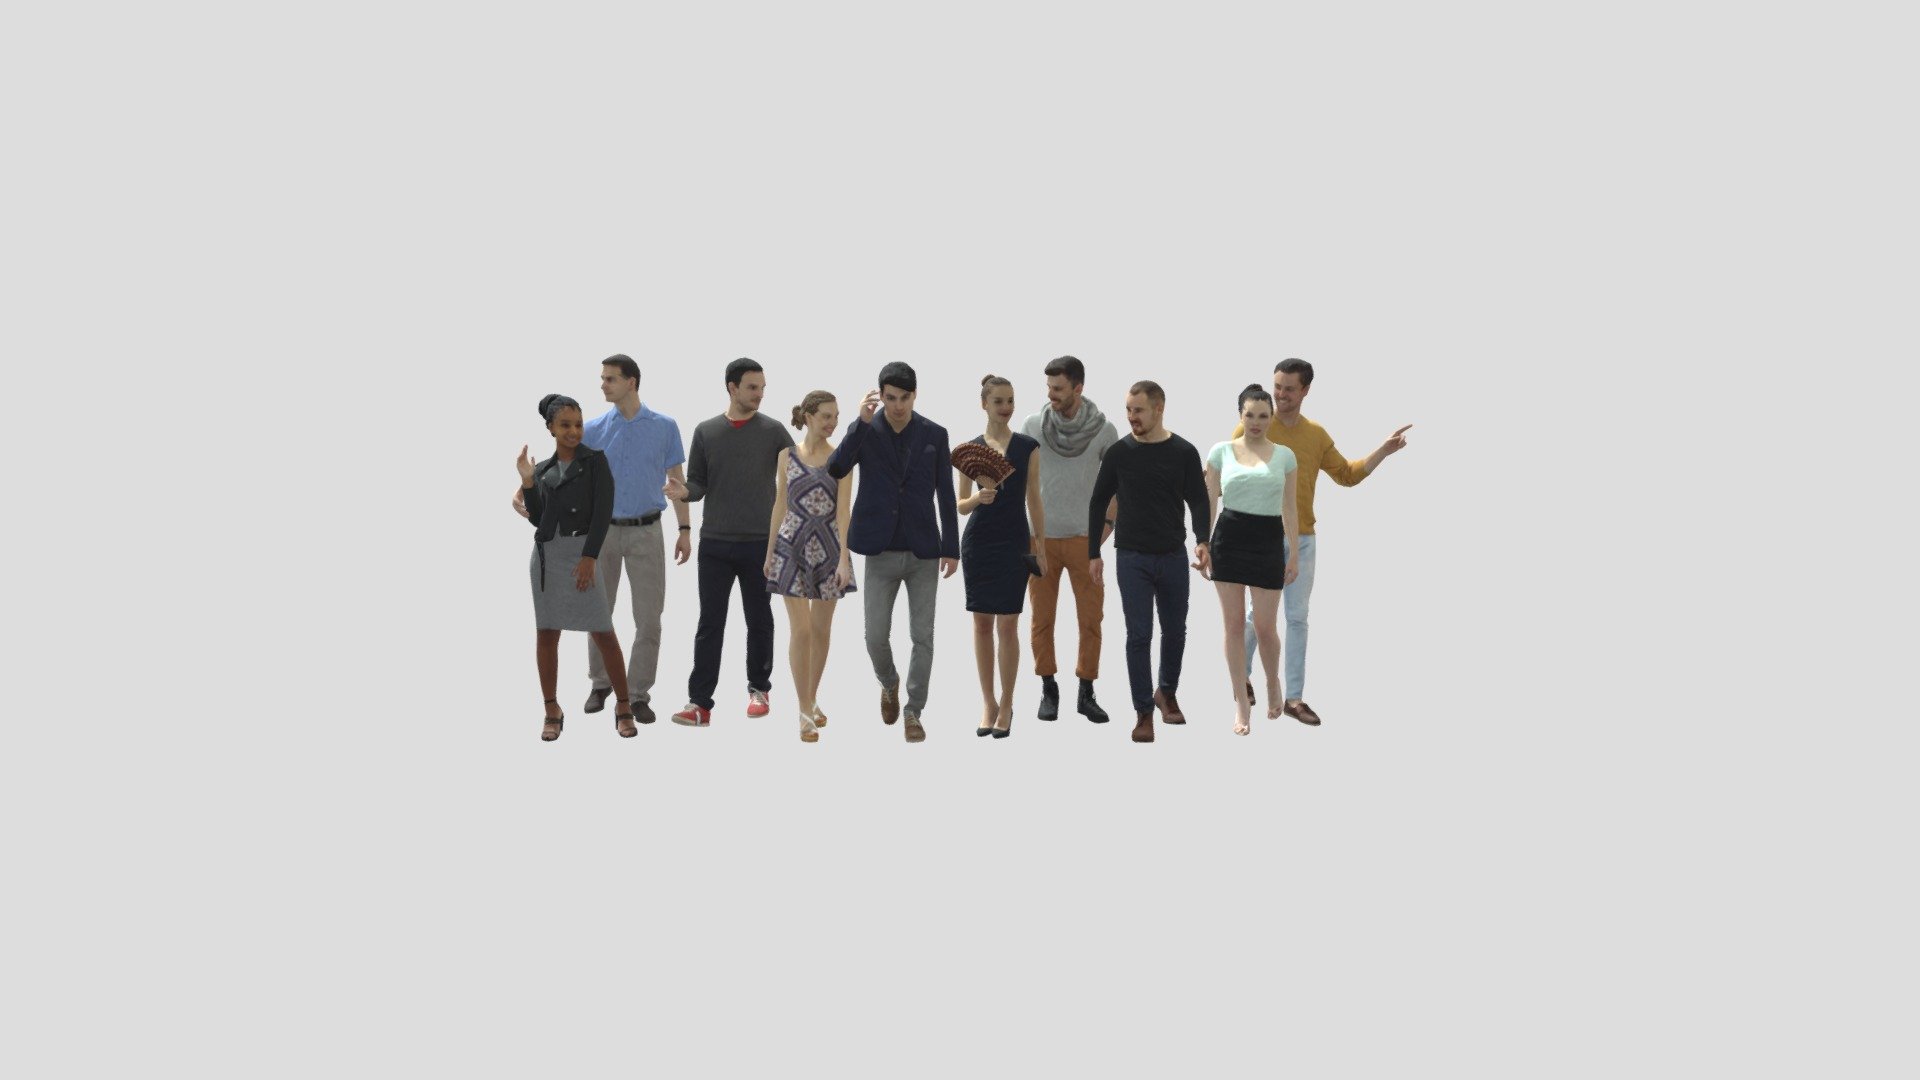 10x LOW POLY CASUAL PEOPLE VOL01 CROWD